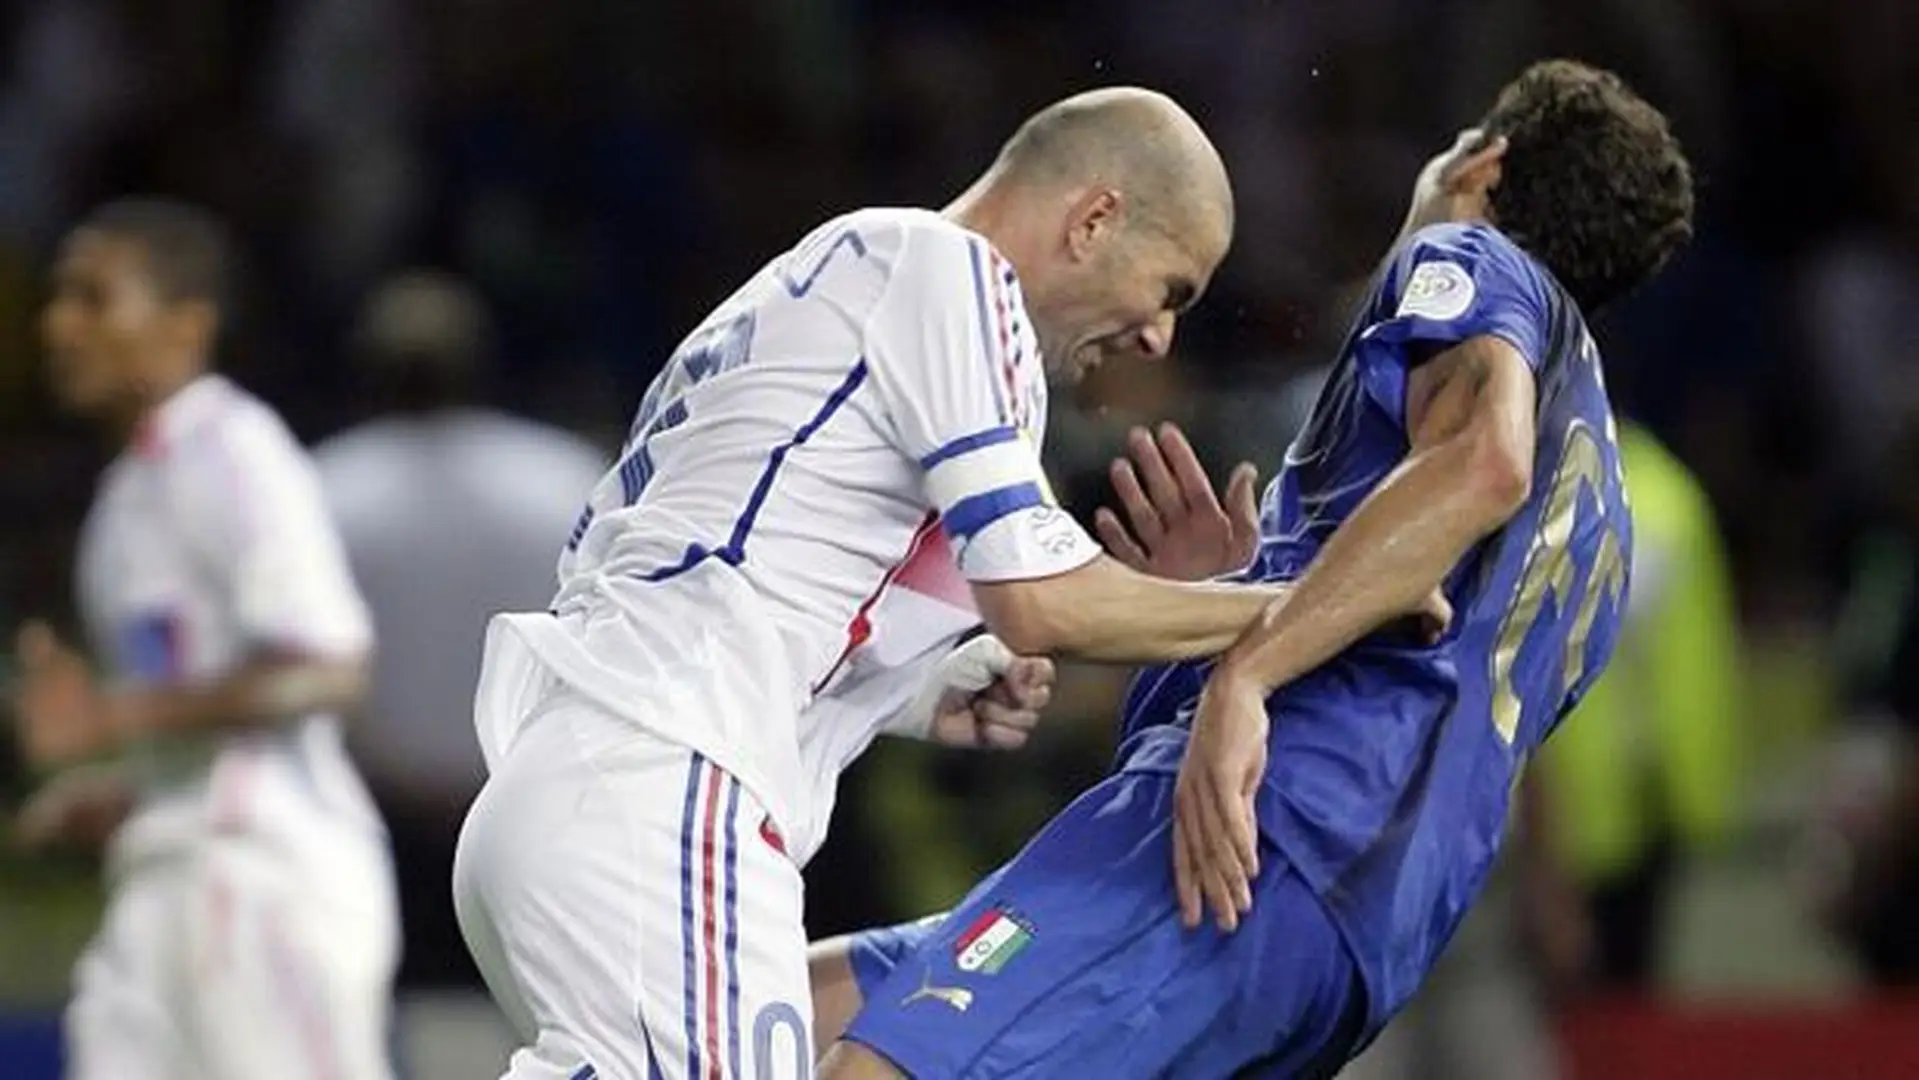 Marco Materazzi reveals exactly what he said to cause Zidane's headbutt in 2006 World Cup final